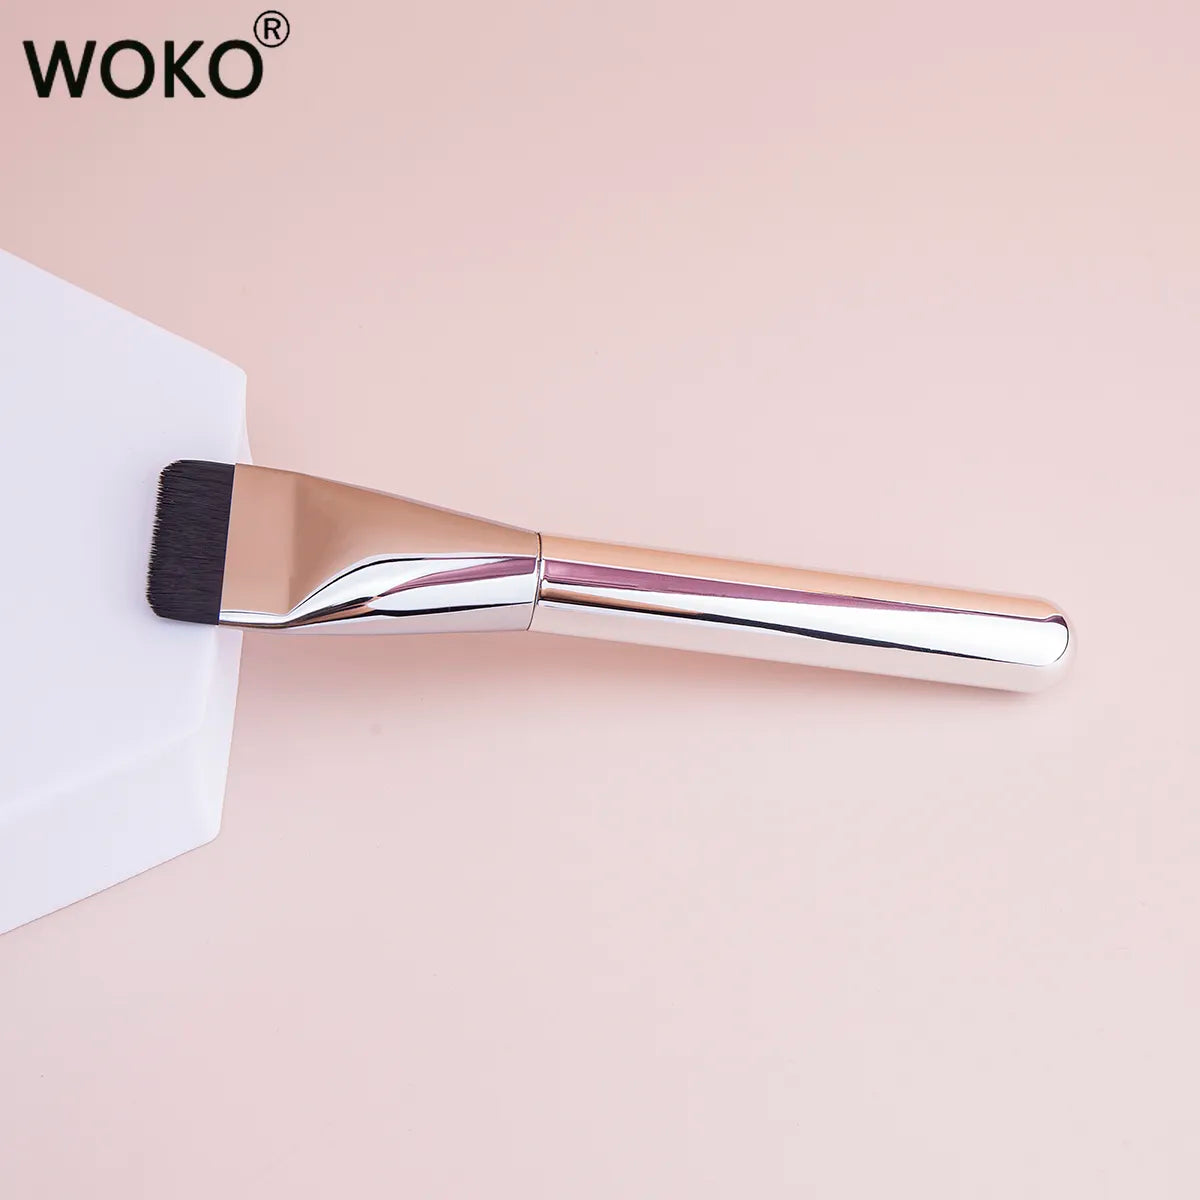 Ultra Thin Foundation Brush and Thin Face Contour Brush